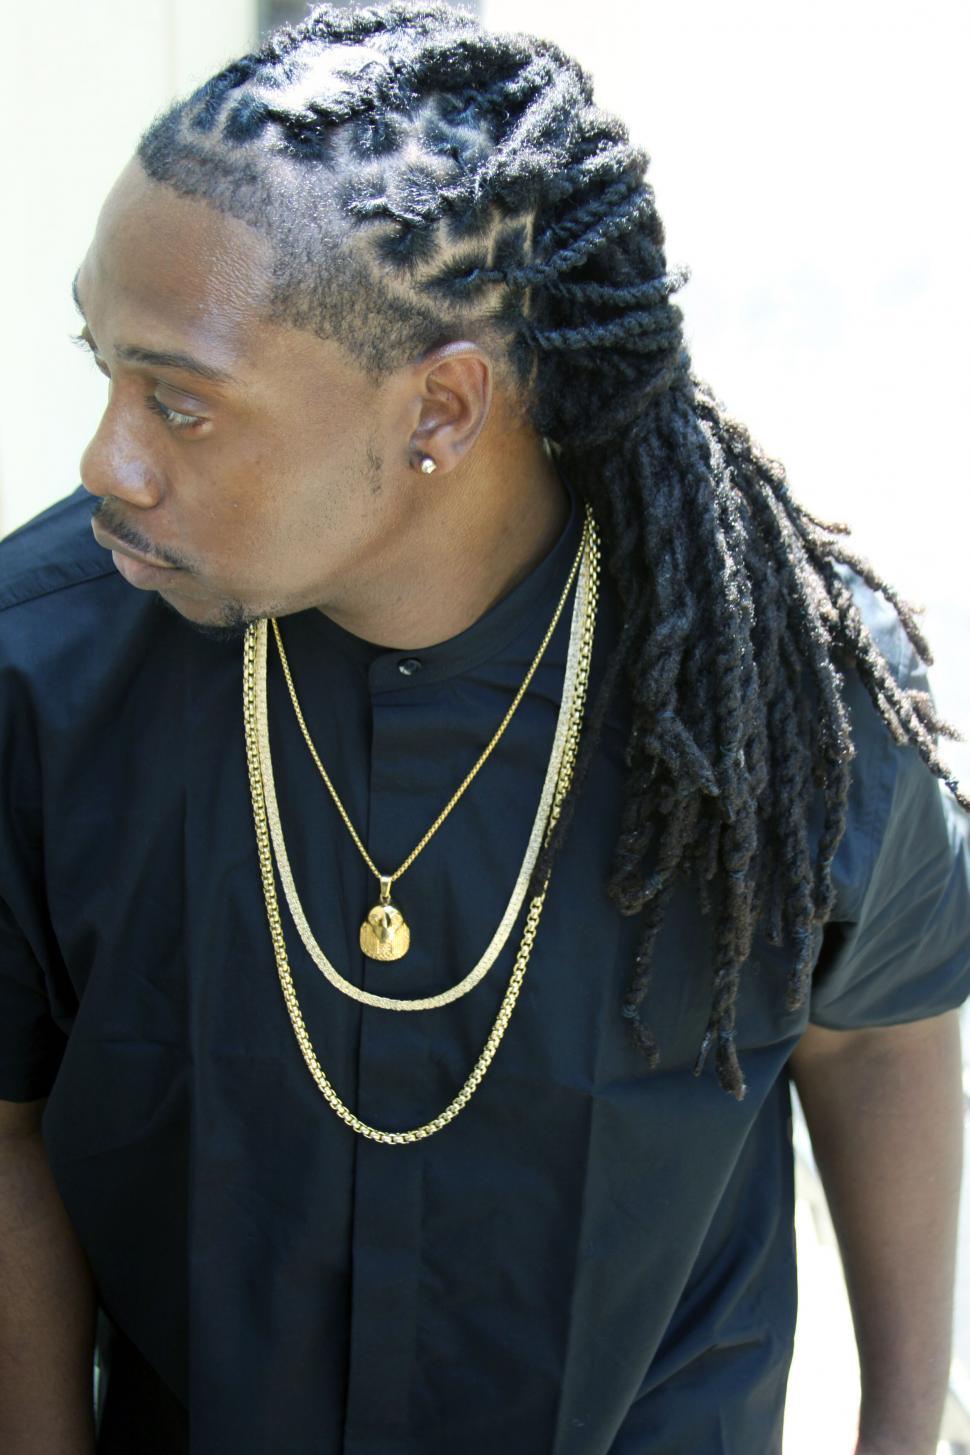 Free Image of Man with braided hairstyle showcasing gold chain 